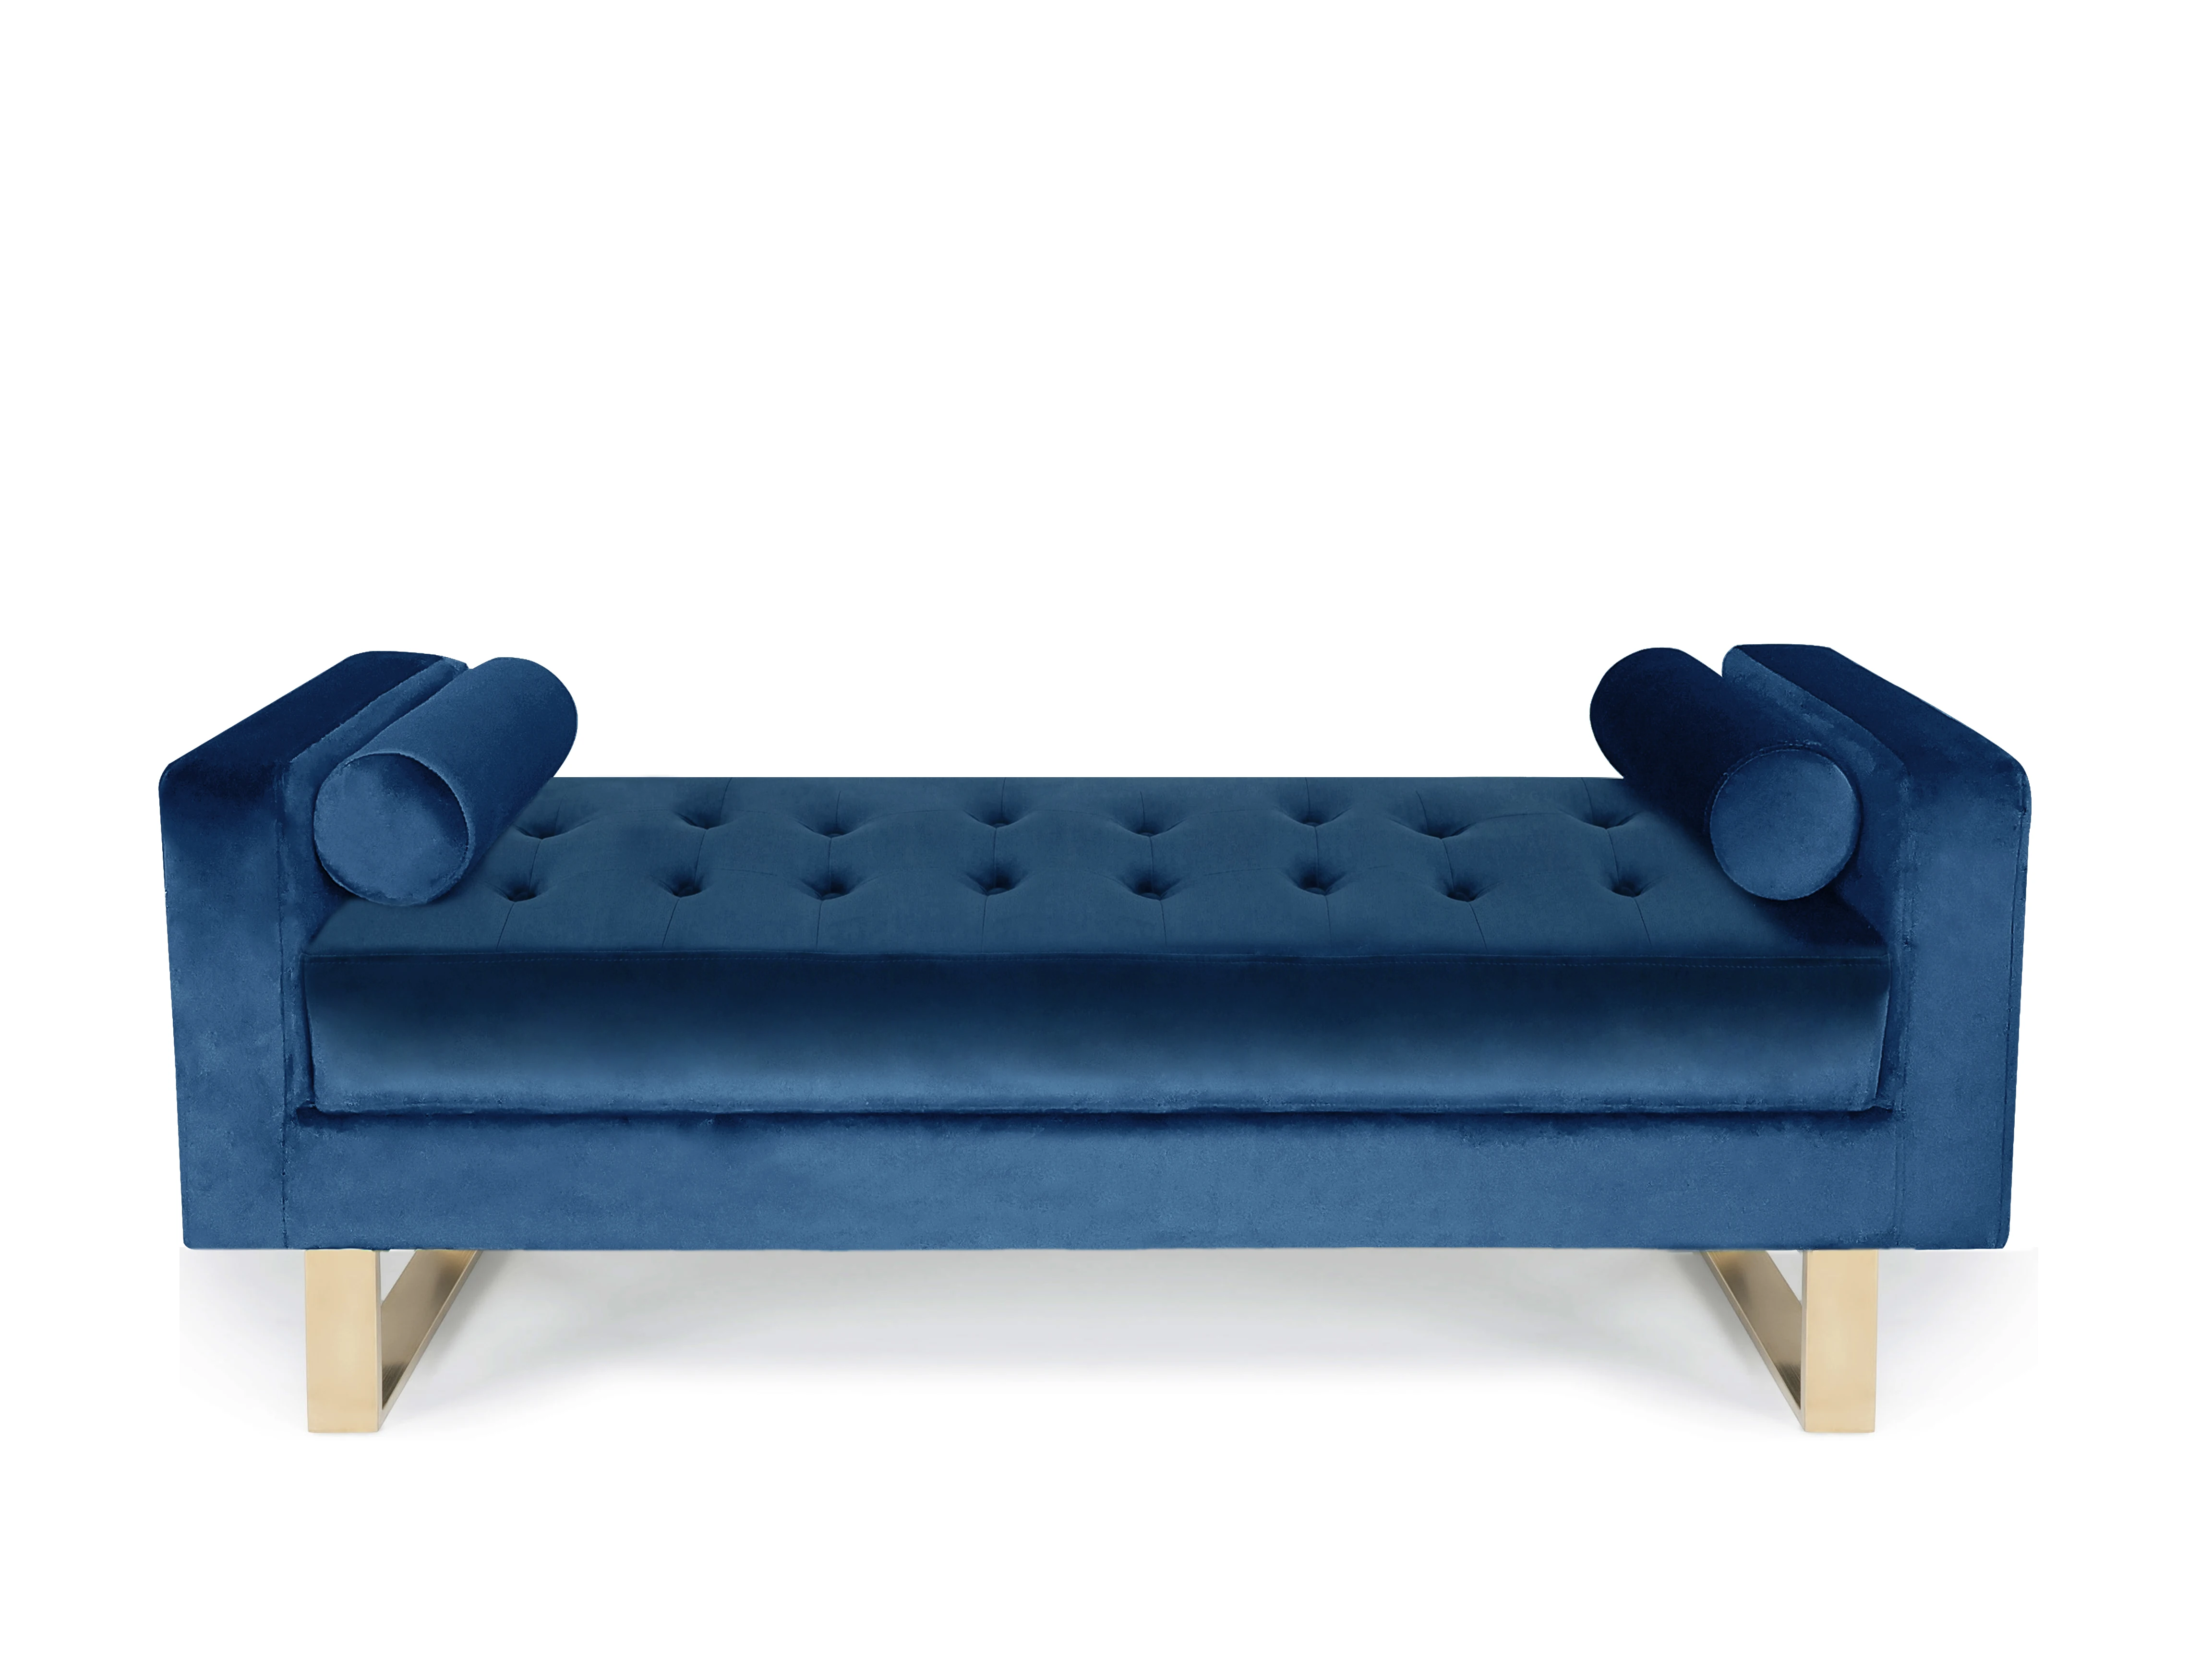 Laynsino French Style Living Room Velvet Bench With Gold Legs Buy Changing Room Bench